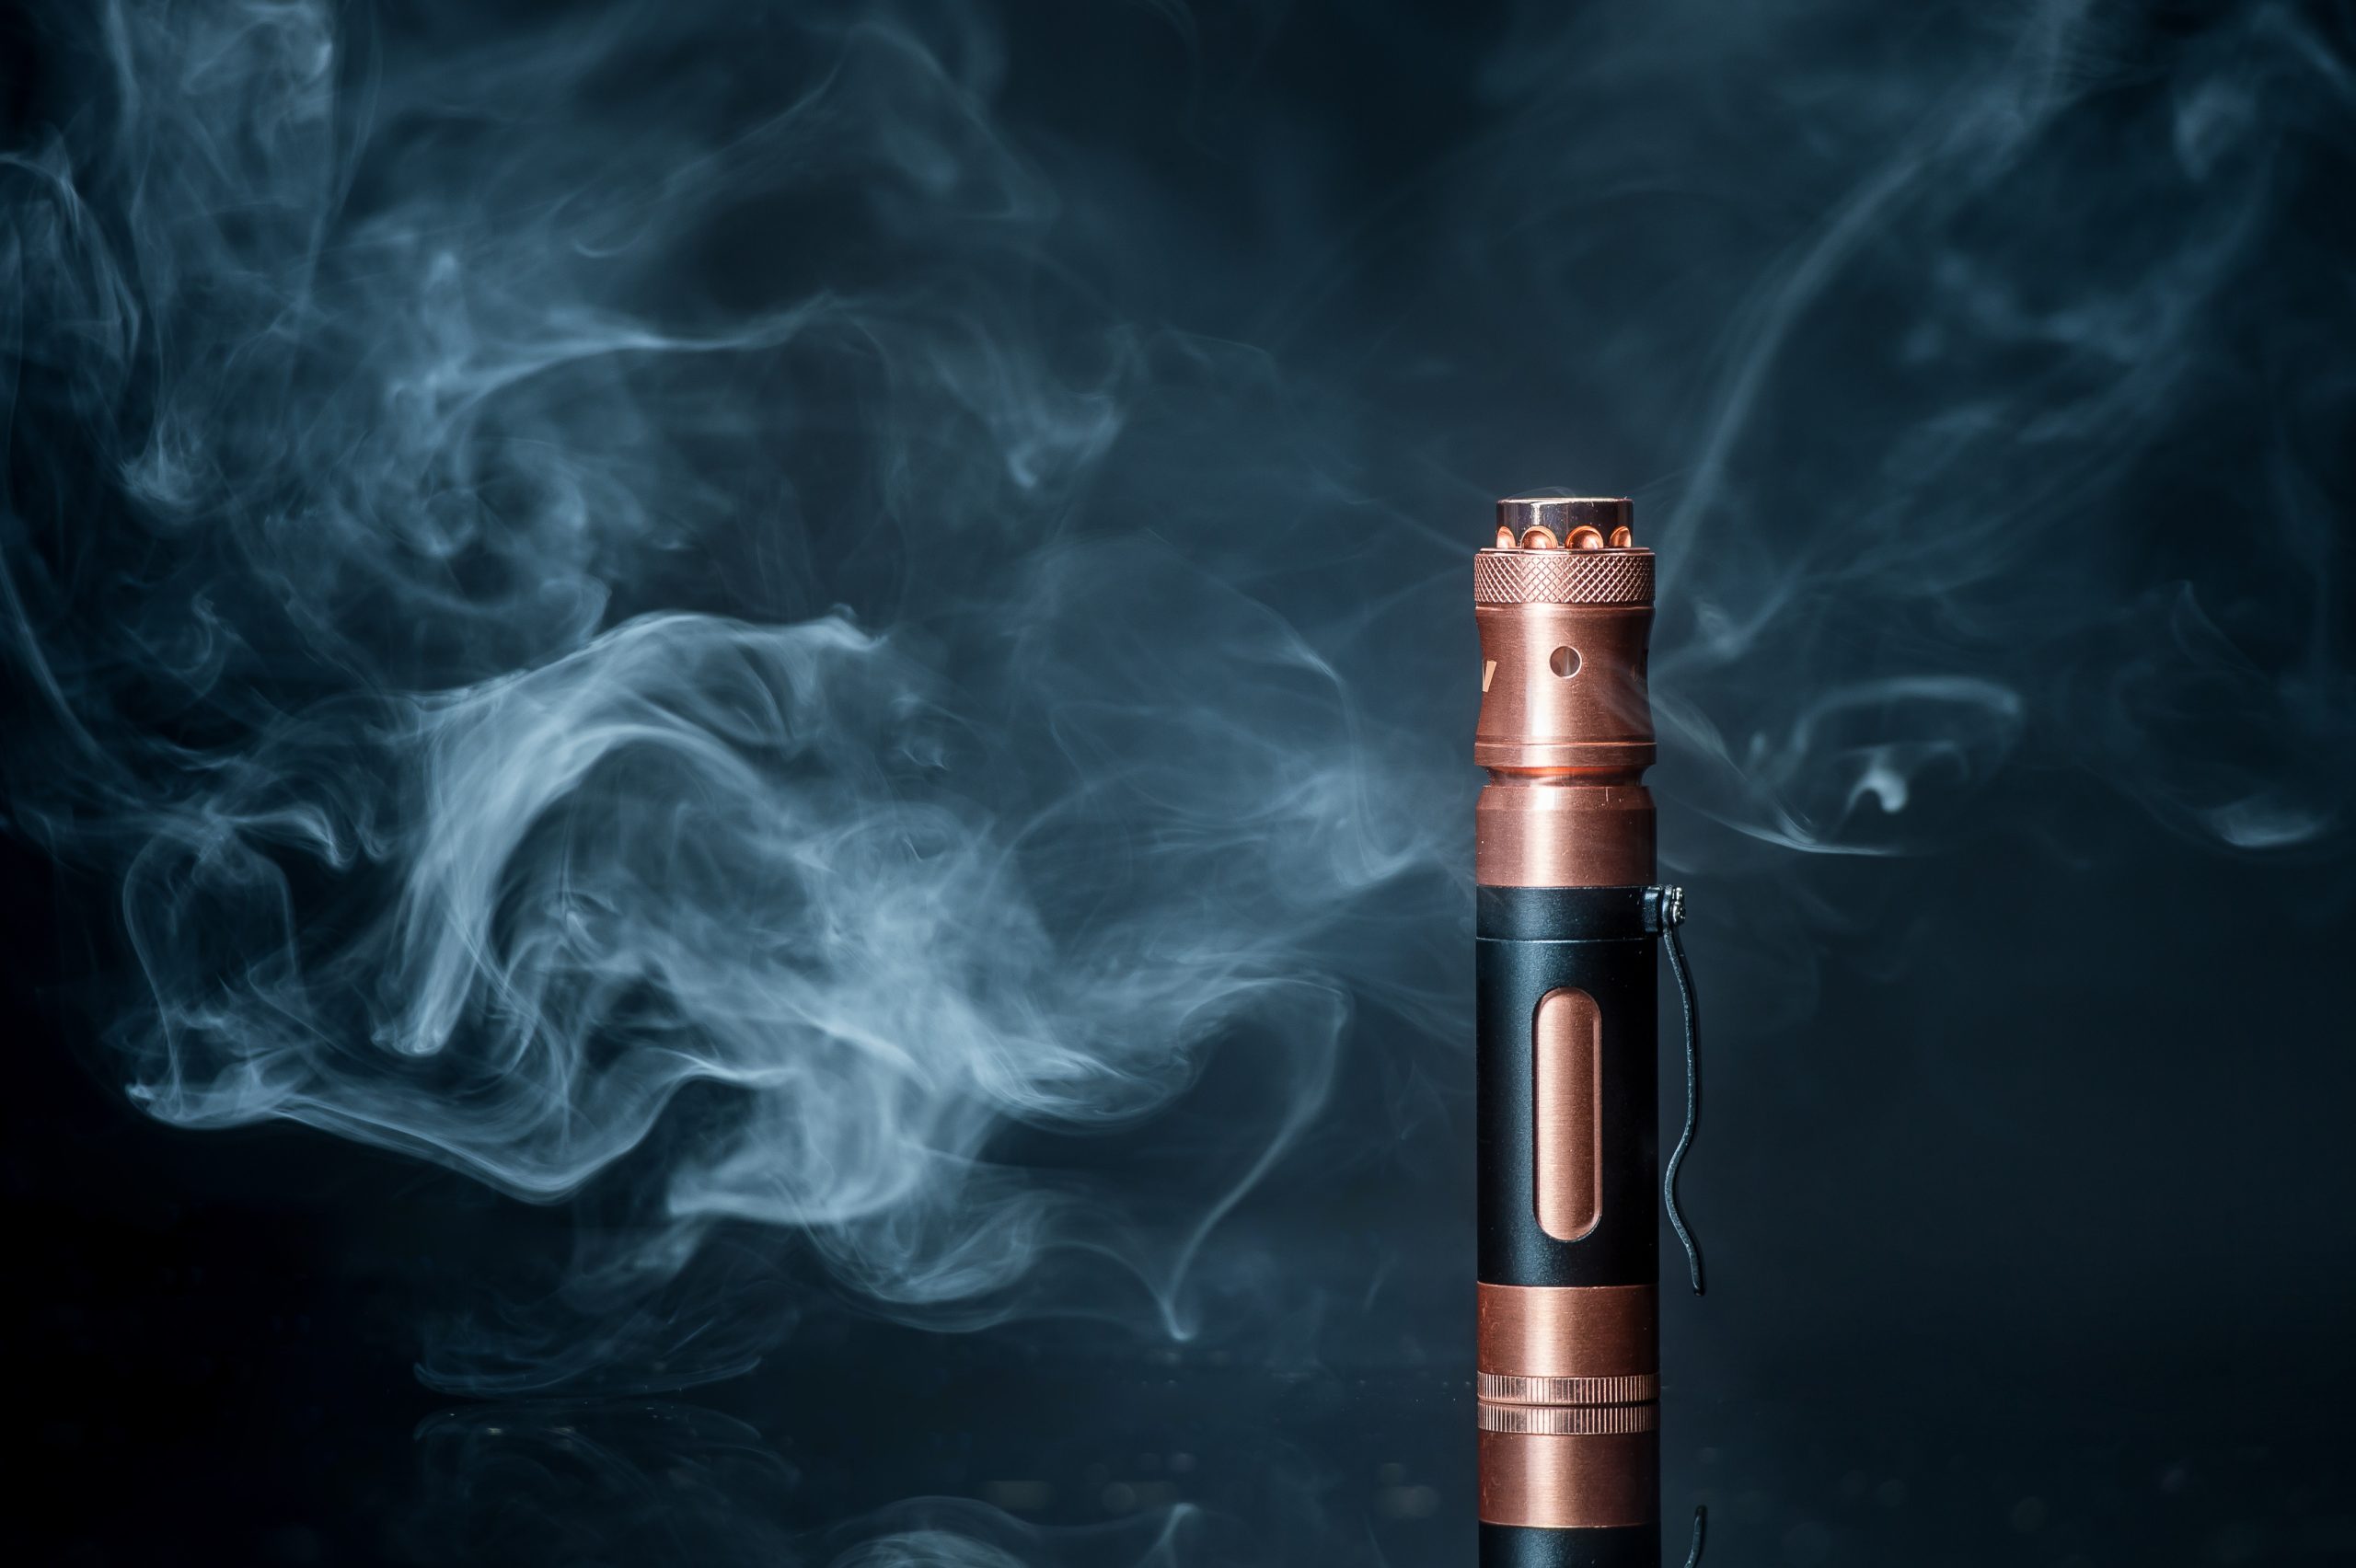 electronic cigarette placed vertically on surface with vapor clouds in the background